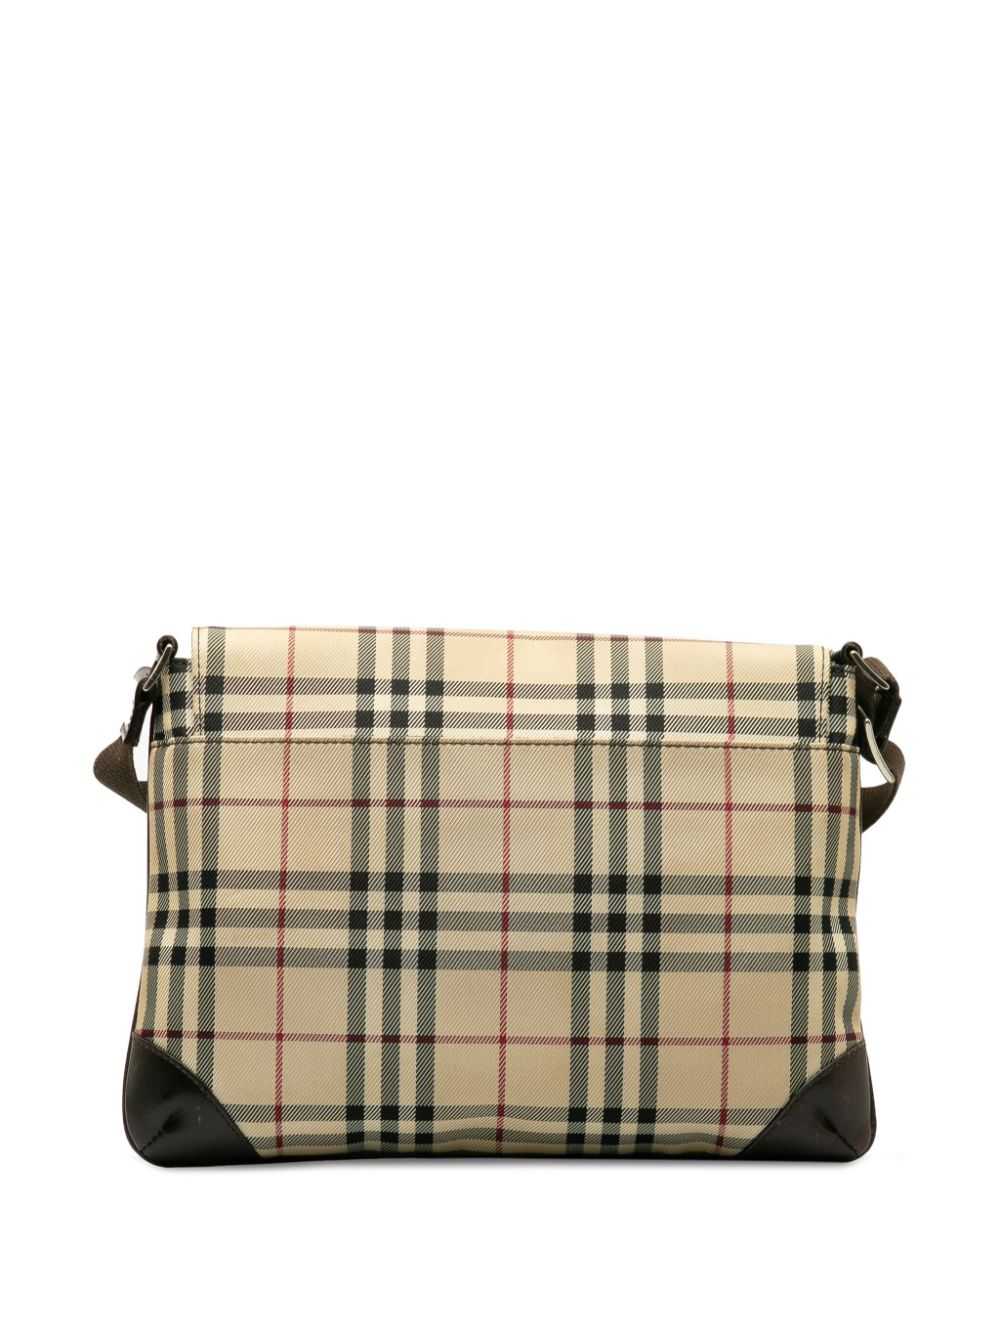 Burberry Pre-Owned 2000-2017 House Check crossbod… - image 2